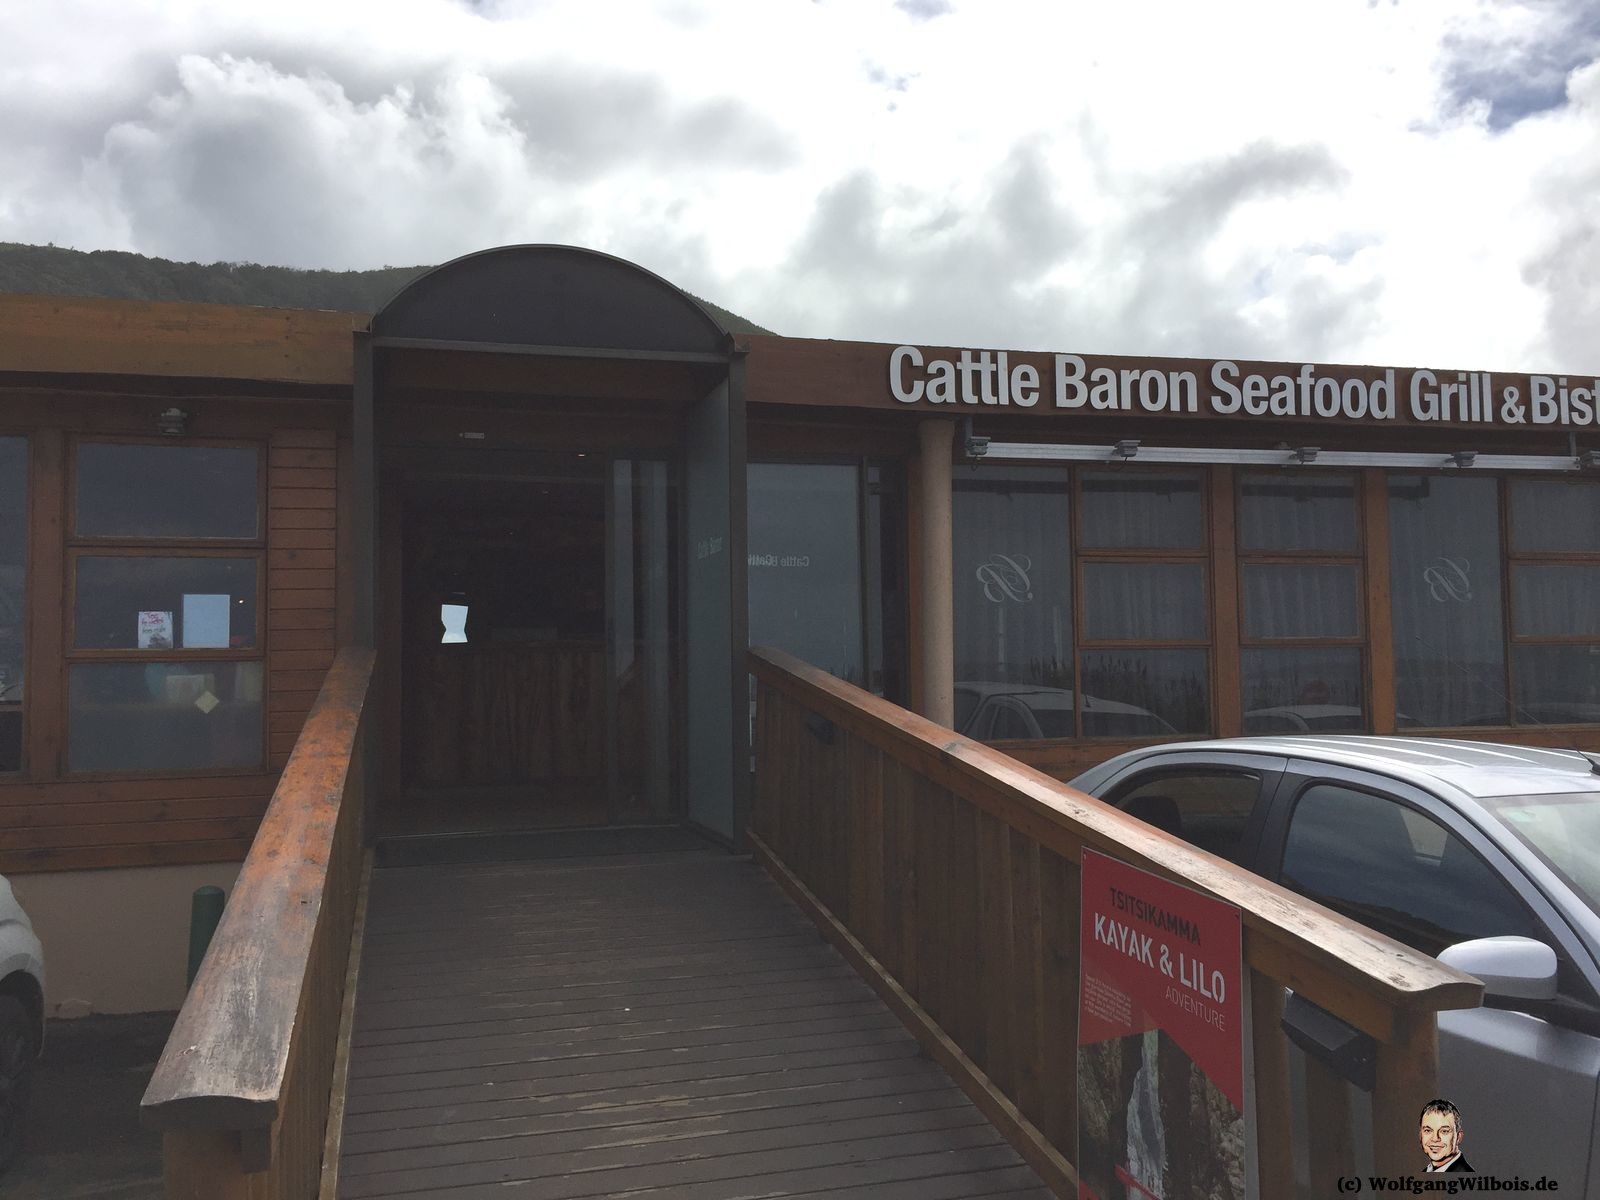 Cattle Baron Seafood Grill Bistro Ttsitsikamma Storms River Mouth Rest Camp